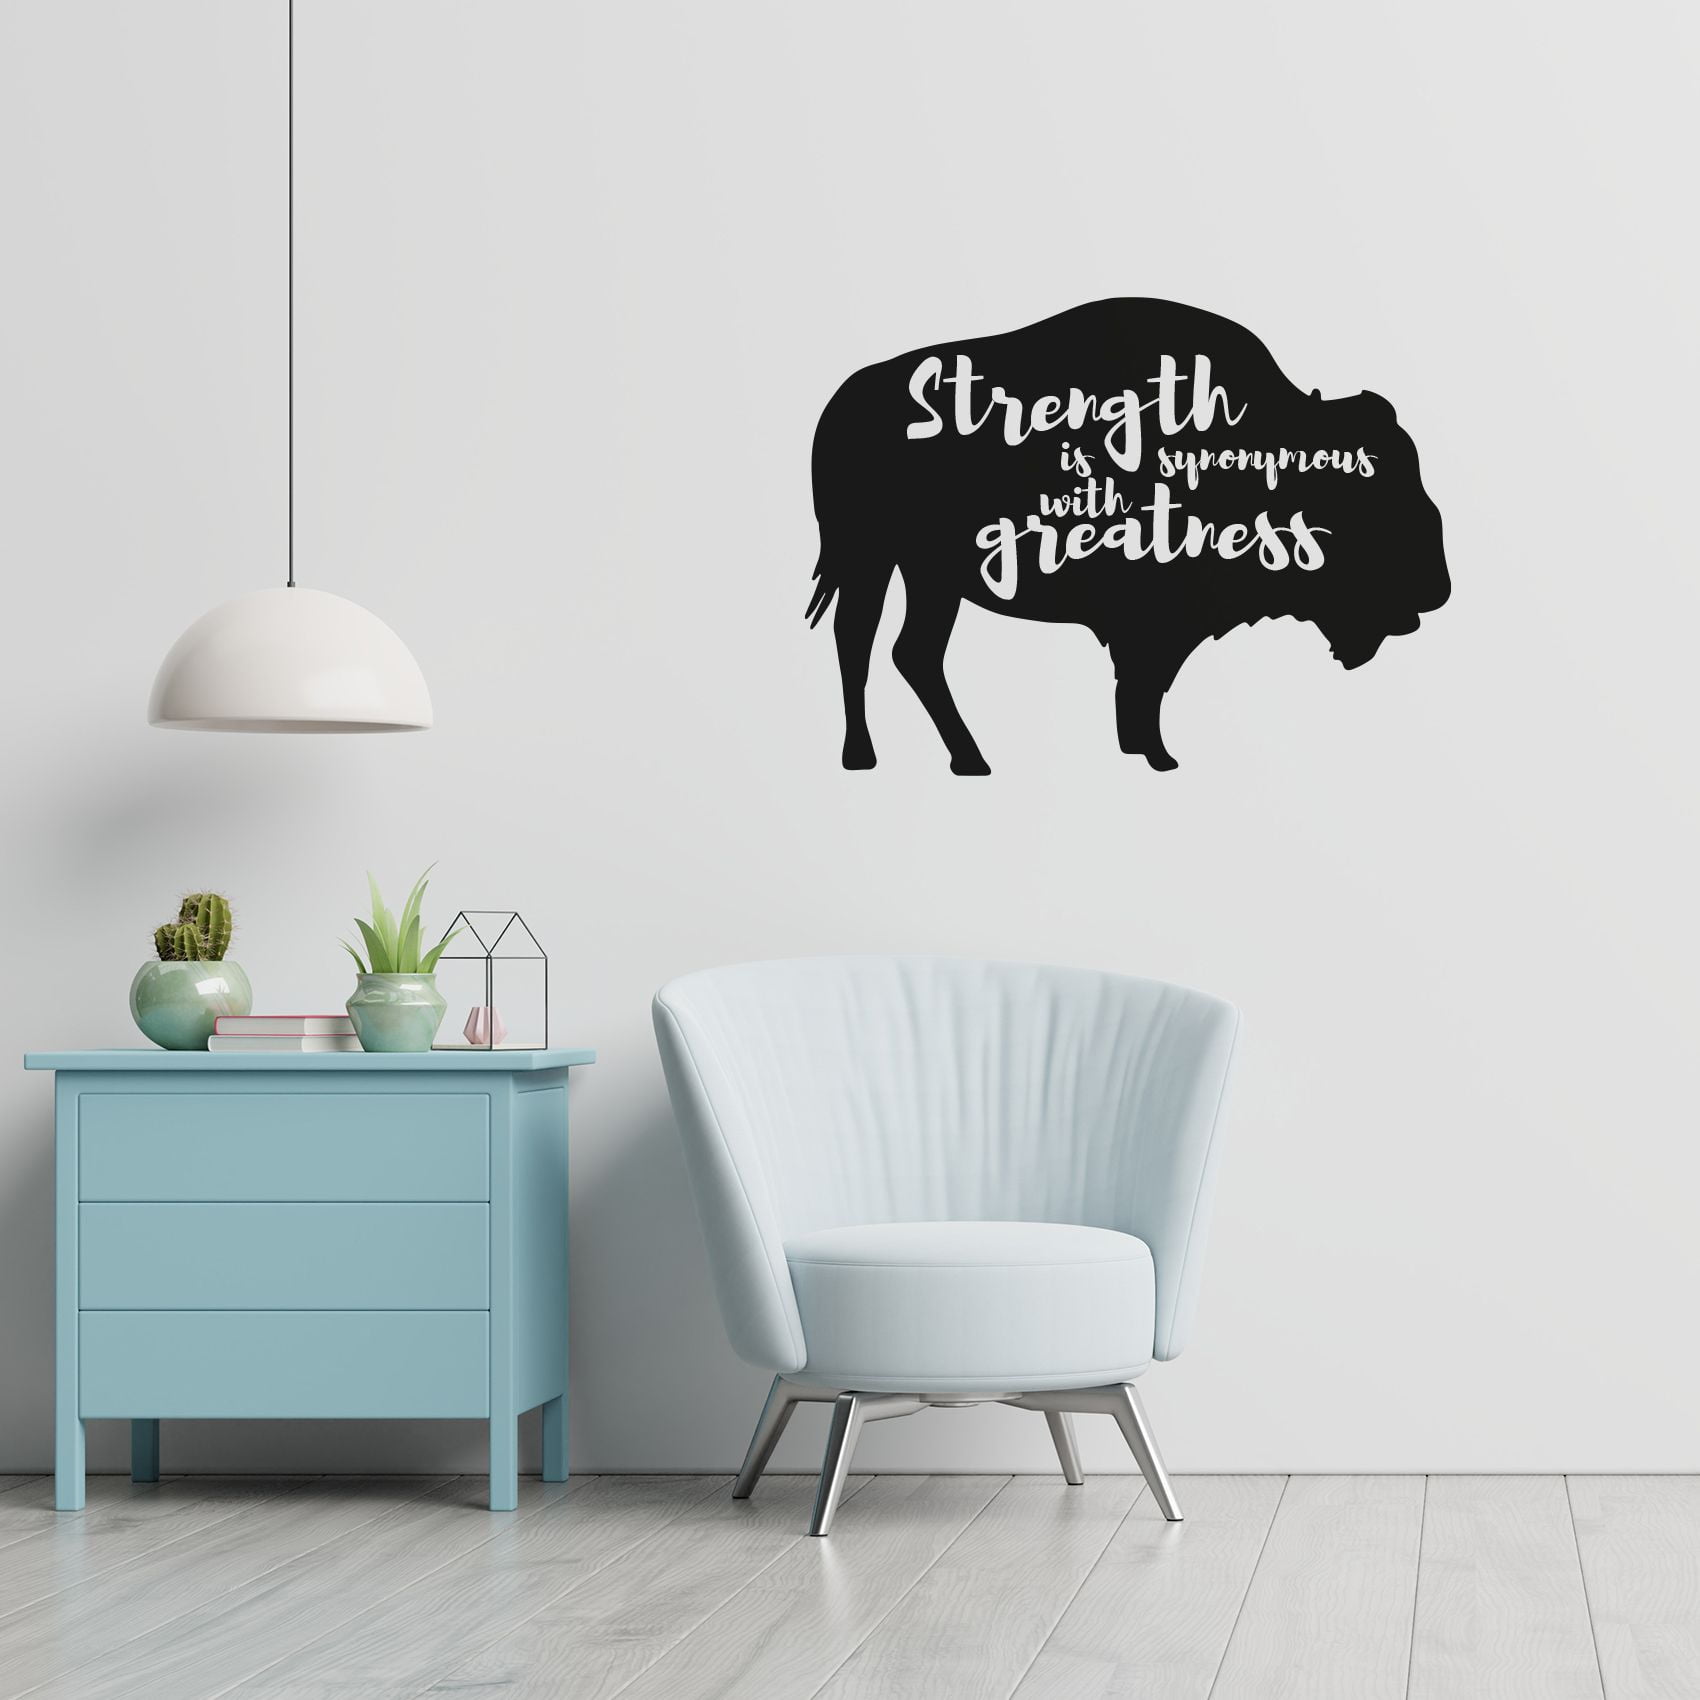 JUST AS YOU ARE FILM QUOTES WALL ART DECAL VINYL STICKER Details about   I LIKE YOU VERY MUCH